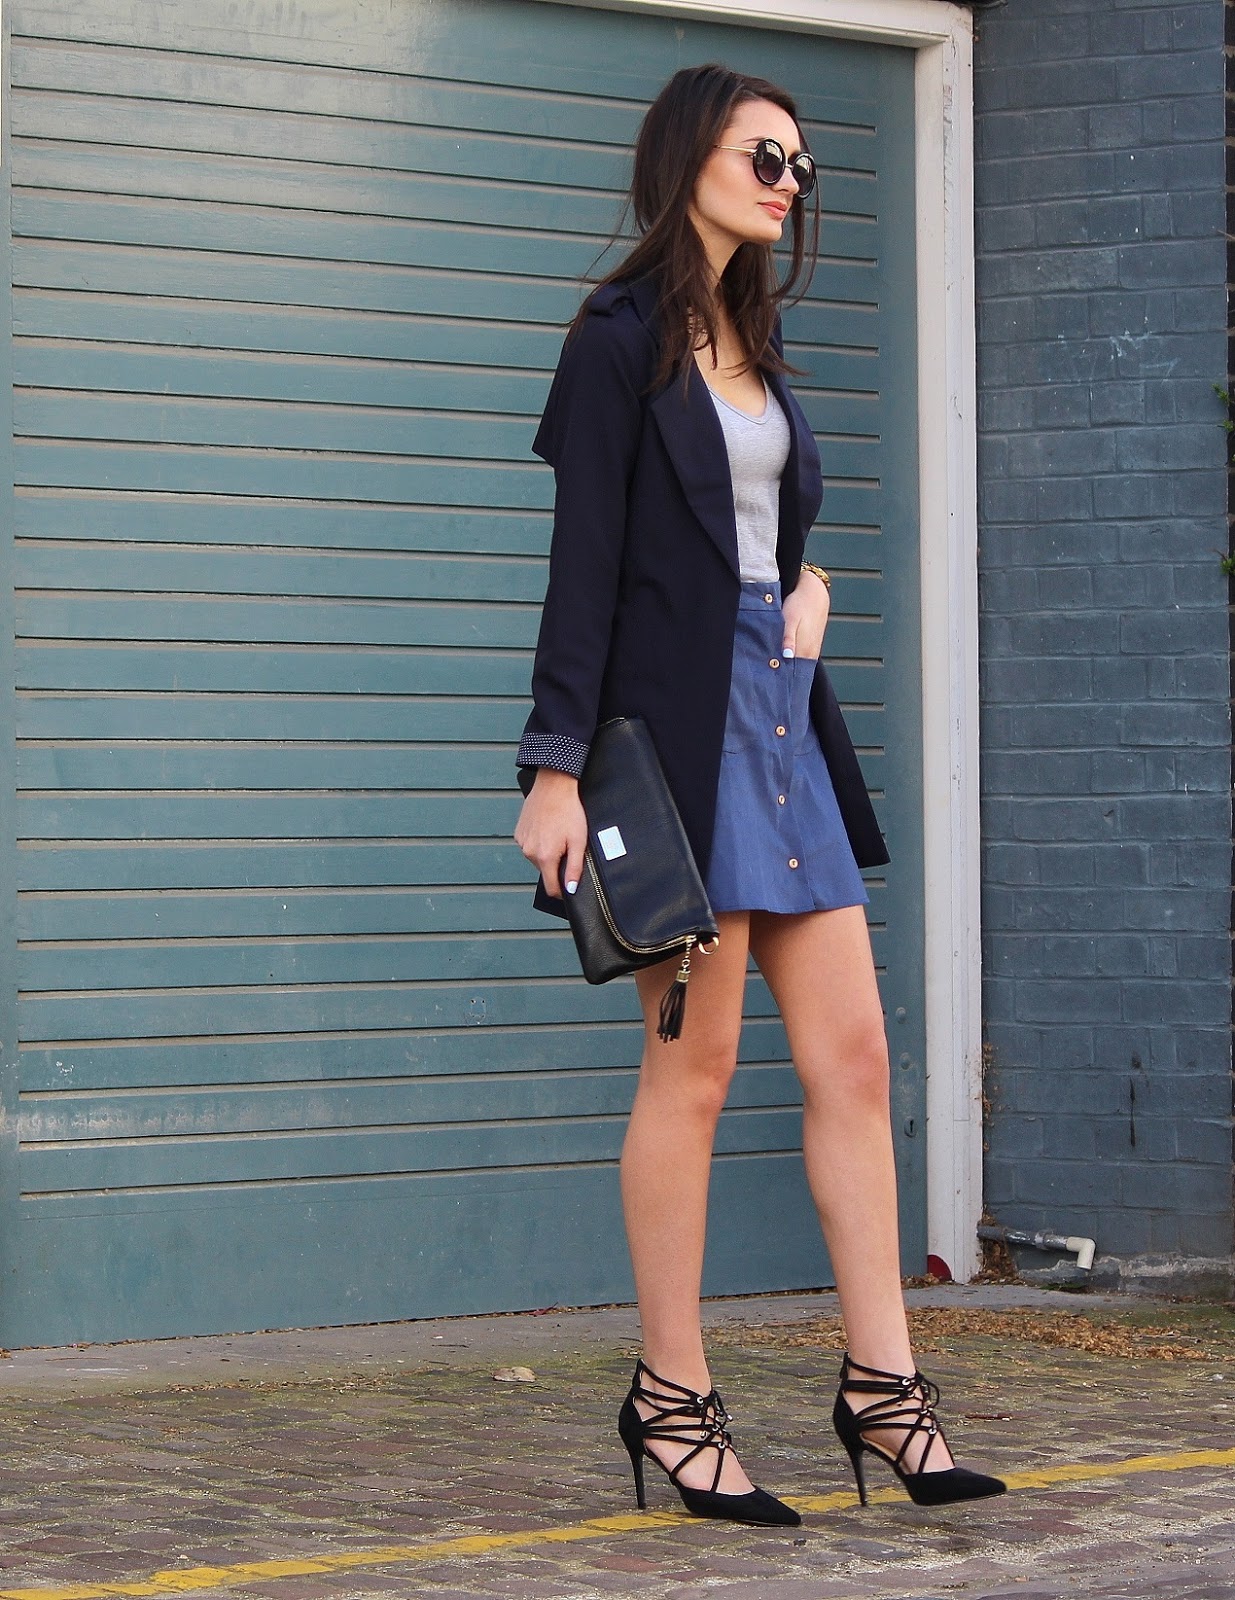 peexo fashion blogger wearing trench coat and a-line button down skirt 70's and lace up heels